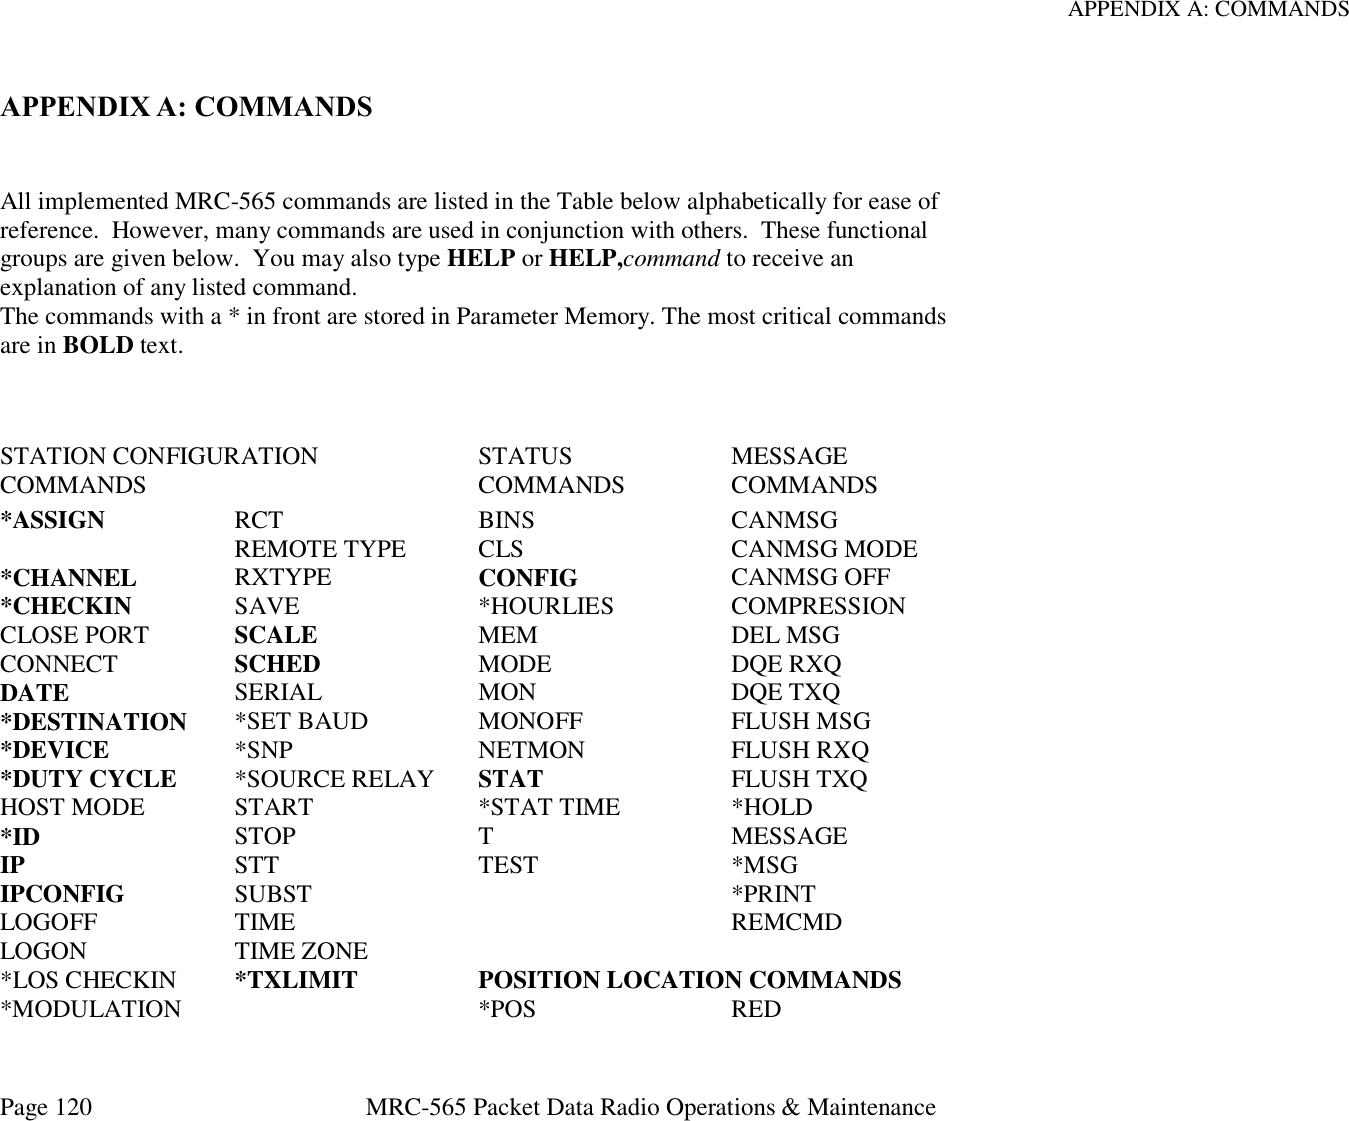 APPENDIX A: COMMANDS Page 120  MRC-565 Packet Data Radio Operations &amp; Maintenance APPENDIX A: COMMANDS   All implemented MRC-565 commands are listed in the Table below alphabetically for ease of reference.  However, many commands are used in conjunction with others.  These functional groups are given below.  You may also type HELP or HELP,command to receive an explanation of any listed command. The commands with a * in front are stored in Parameter Memory. The most critical commands are in BOLD text.     STATION CONFIGURATION COMMANDS STATUS COMMANDS MESSAGE COMMANDS *ASSIGN RCT BINS CANMSG  REMOTE TYPE CLS CANMSG MODE *CHANNEL RXTYPE CONFIG CANMSG OFF *CHECKIN SAVE *HOURLIES COMPRESSION CLOSE PORT SCALE MEM DEL MSG CONNECT SCHED MODE DQE RXQ DATE SERIAL MON DQE TXQ *DESTINATION *SET BAUD MONOFF FLUSH MSG *DEVICE *SNP NETMON FLUSH RXQ *DUTY CYCLE *SOURCE RELAY STAT FLUSH TXQ HOST MODE START *STAT TIME *HOLD *ID STOP T MESSAGE IP STT TEST *MSG IPCONFIG SUBST  *PRINT LOGOFF TIME  REMCMD LOGON TIME ZONE   *LOS CHECKIN *TXLIMIT POSITION LOCATION COMMANDS *MODULATION  *POS RED 